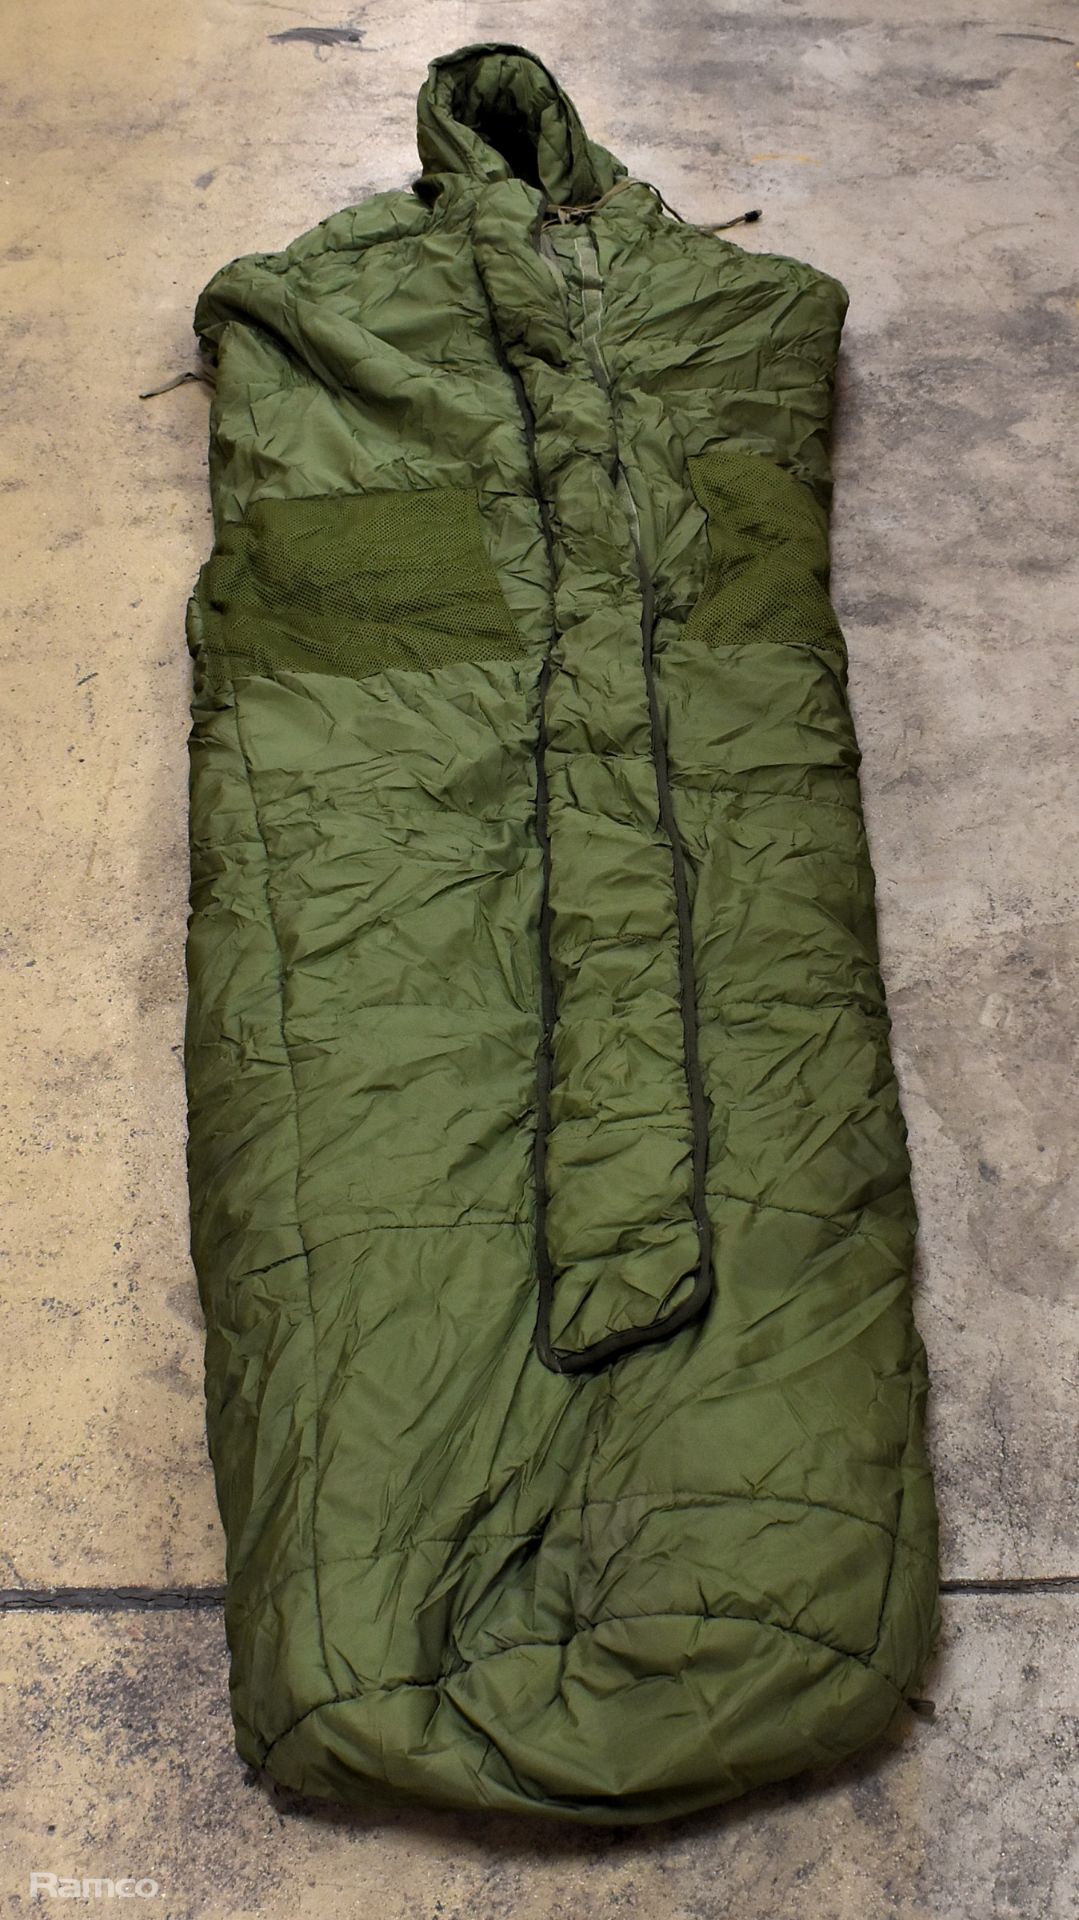 49x Sleeping bags - mixed grades and sizes - Image 2 of 8